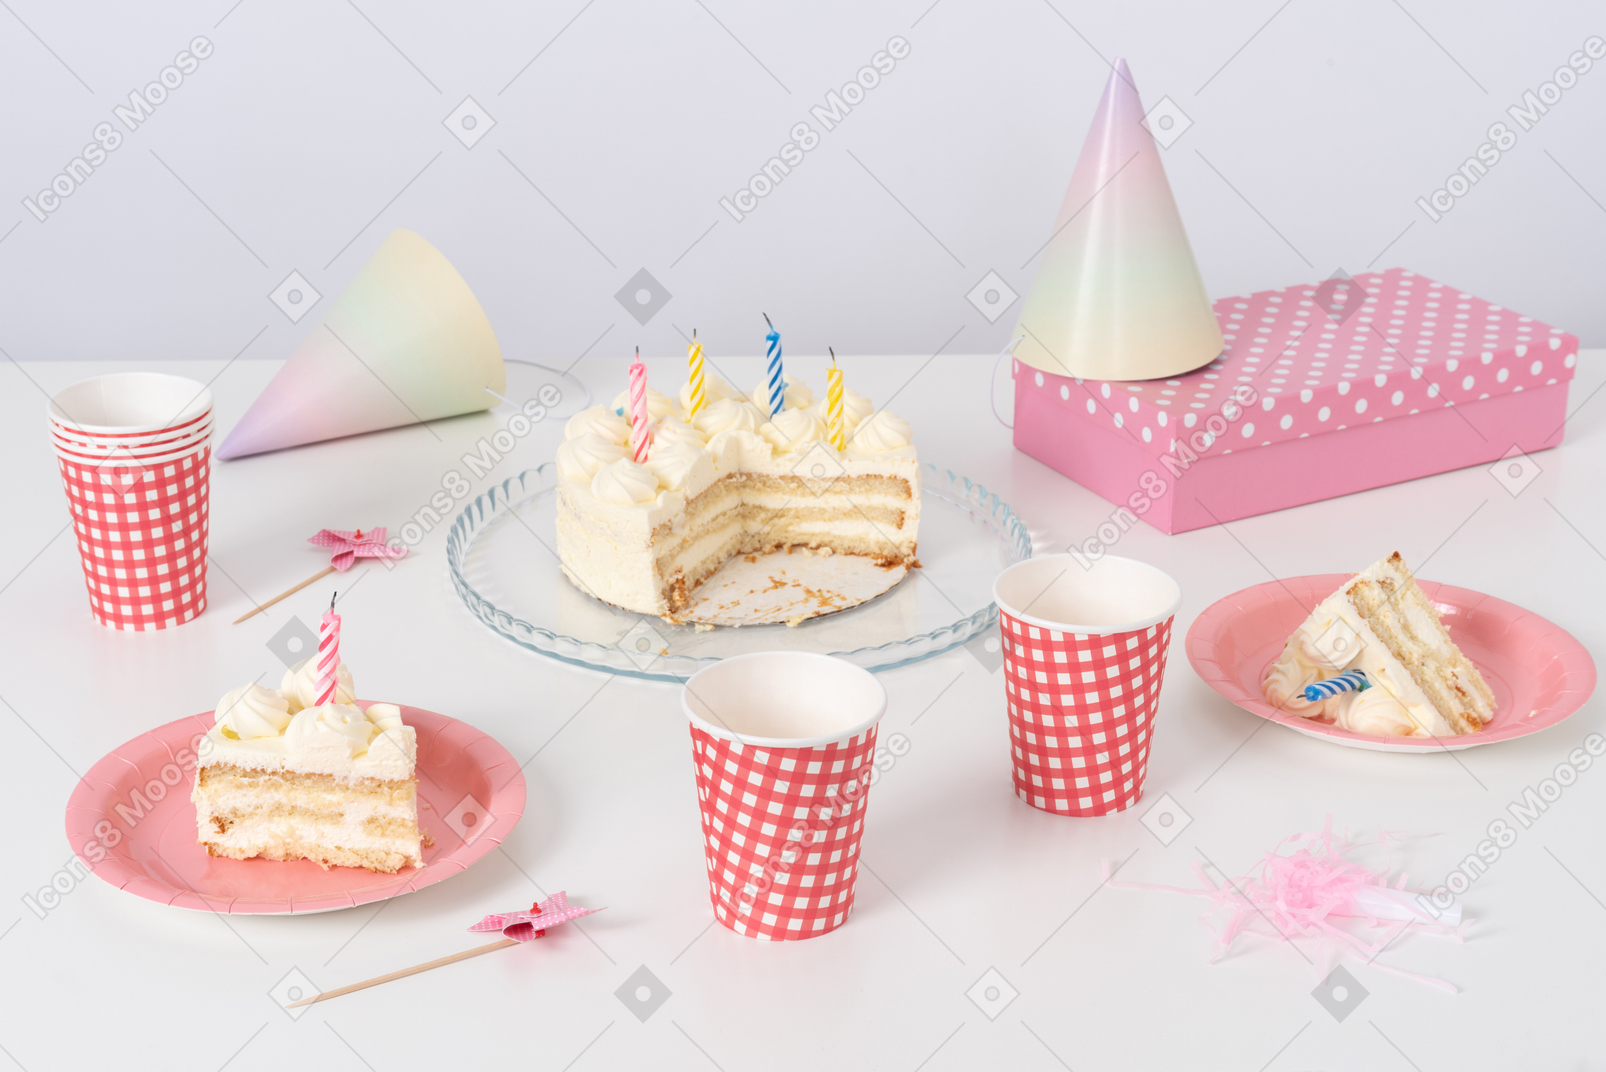 Bunch of birthday items on a white background